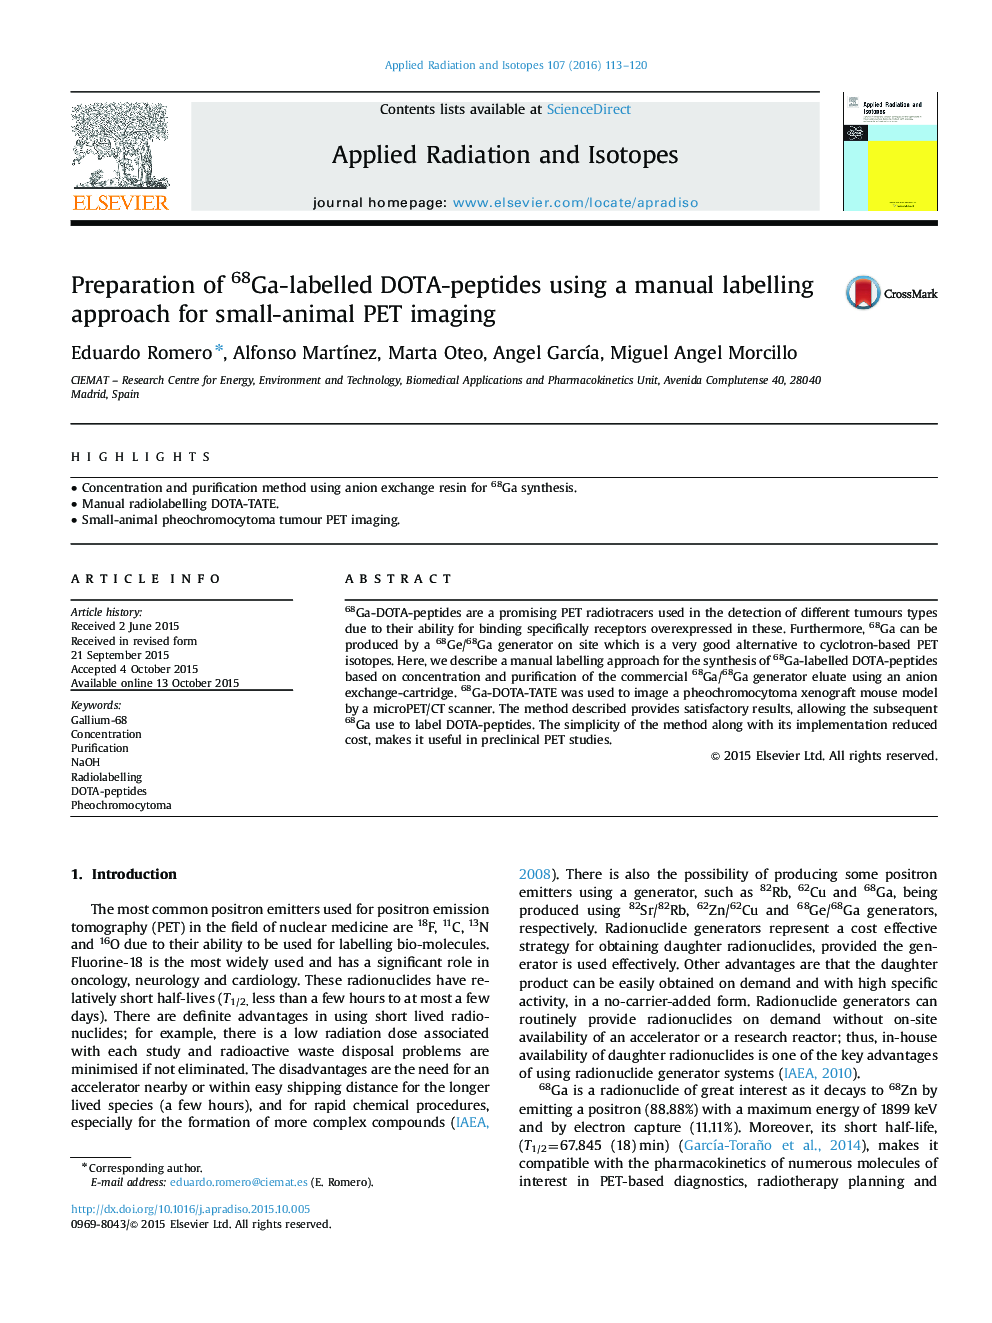 Preparation of 68Ga-labelled DOTA-peptides using a manual labelling approach for small-animal PET imaging